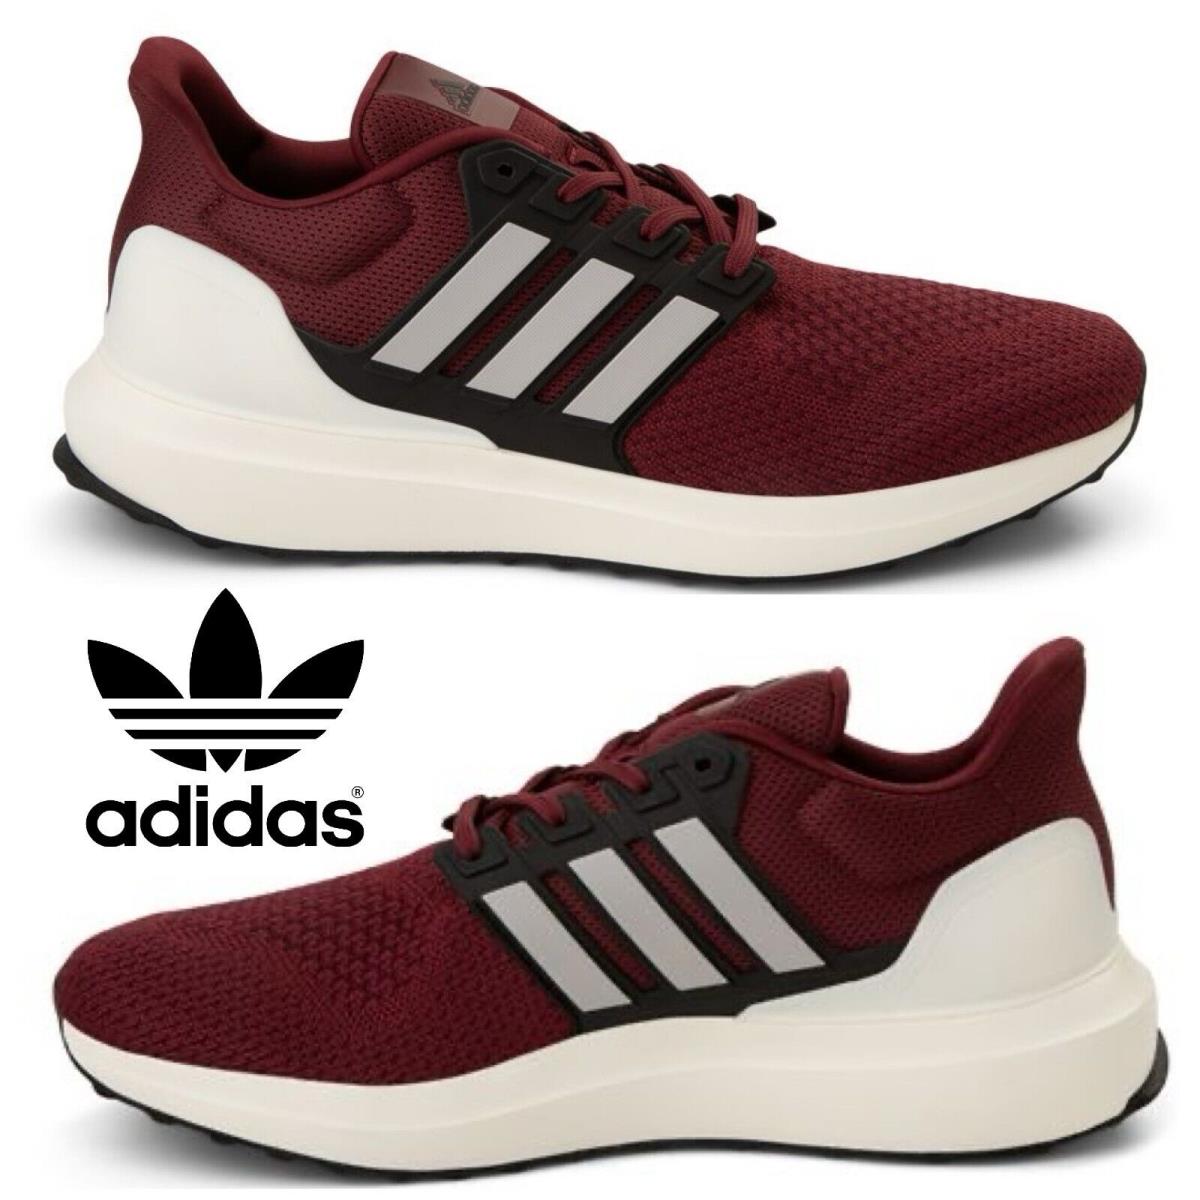 Adidas Ubounce Dna Men`s Sneakers Comfort Sport Casual Running Shoes Black Red